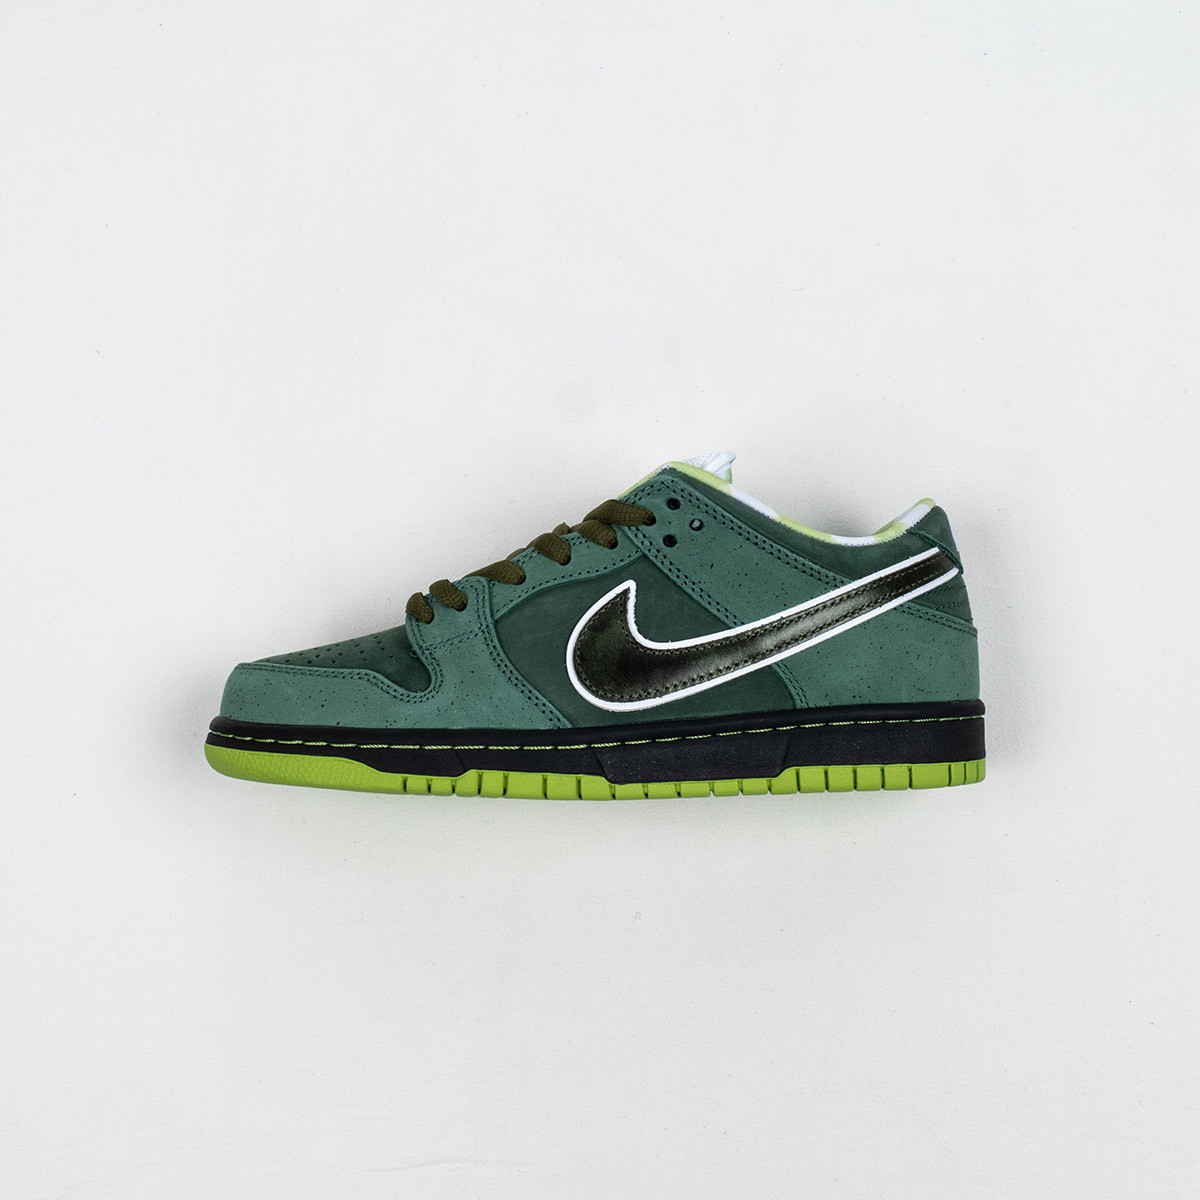 Concepts x Nike SB Dunk Low Green Lobster BV1310-337 For Sale